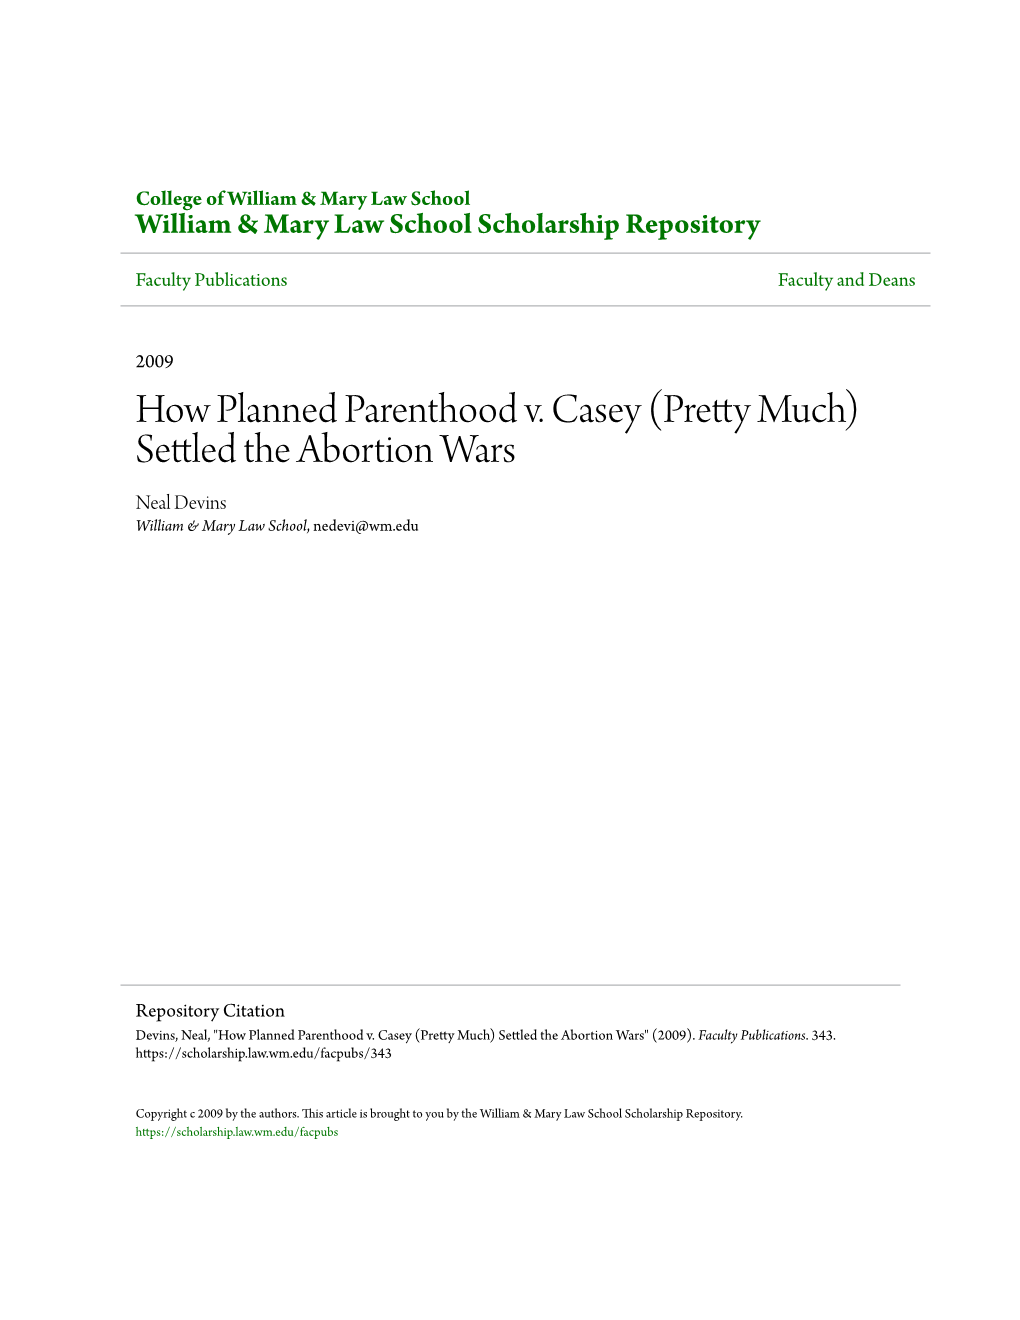 How Planned Parenthood V. Casey (Pretty Much) Settled the Abortion Wars Neal Devins William & Mary Law School, Nedevi@Wm.Edu